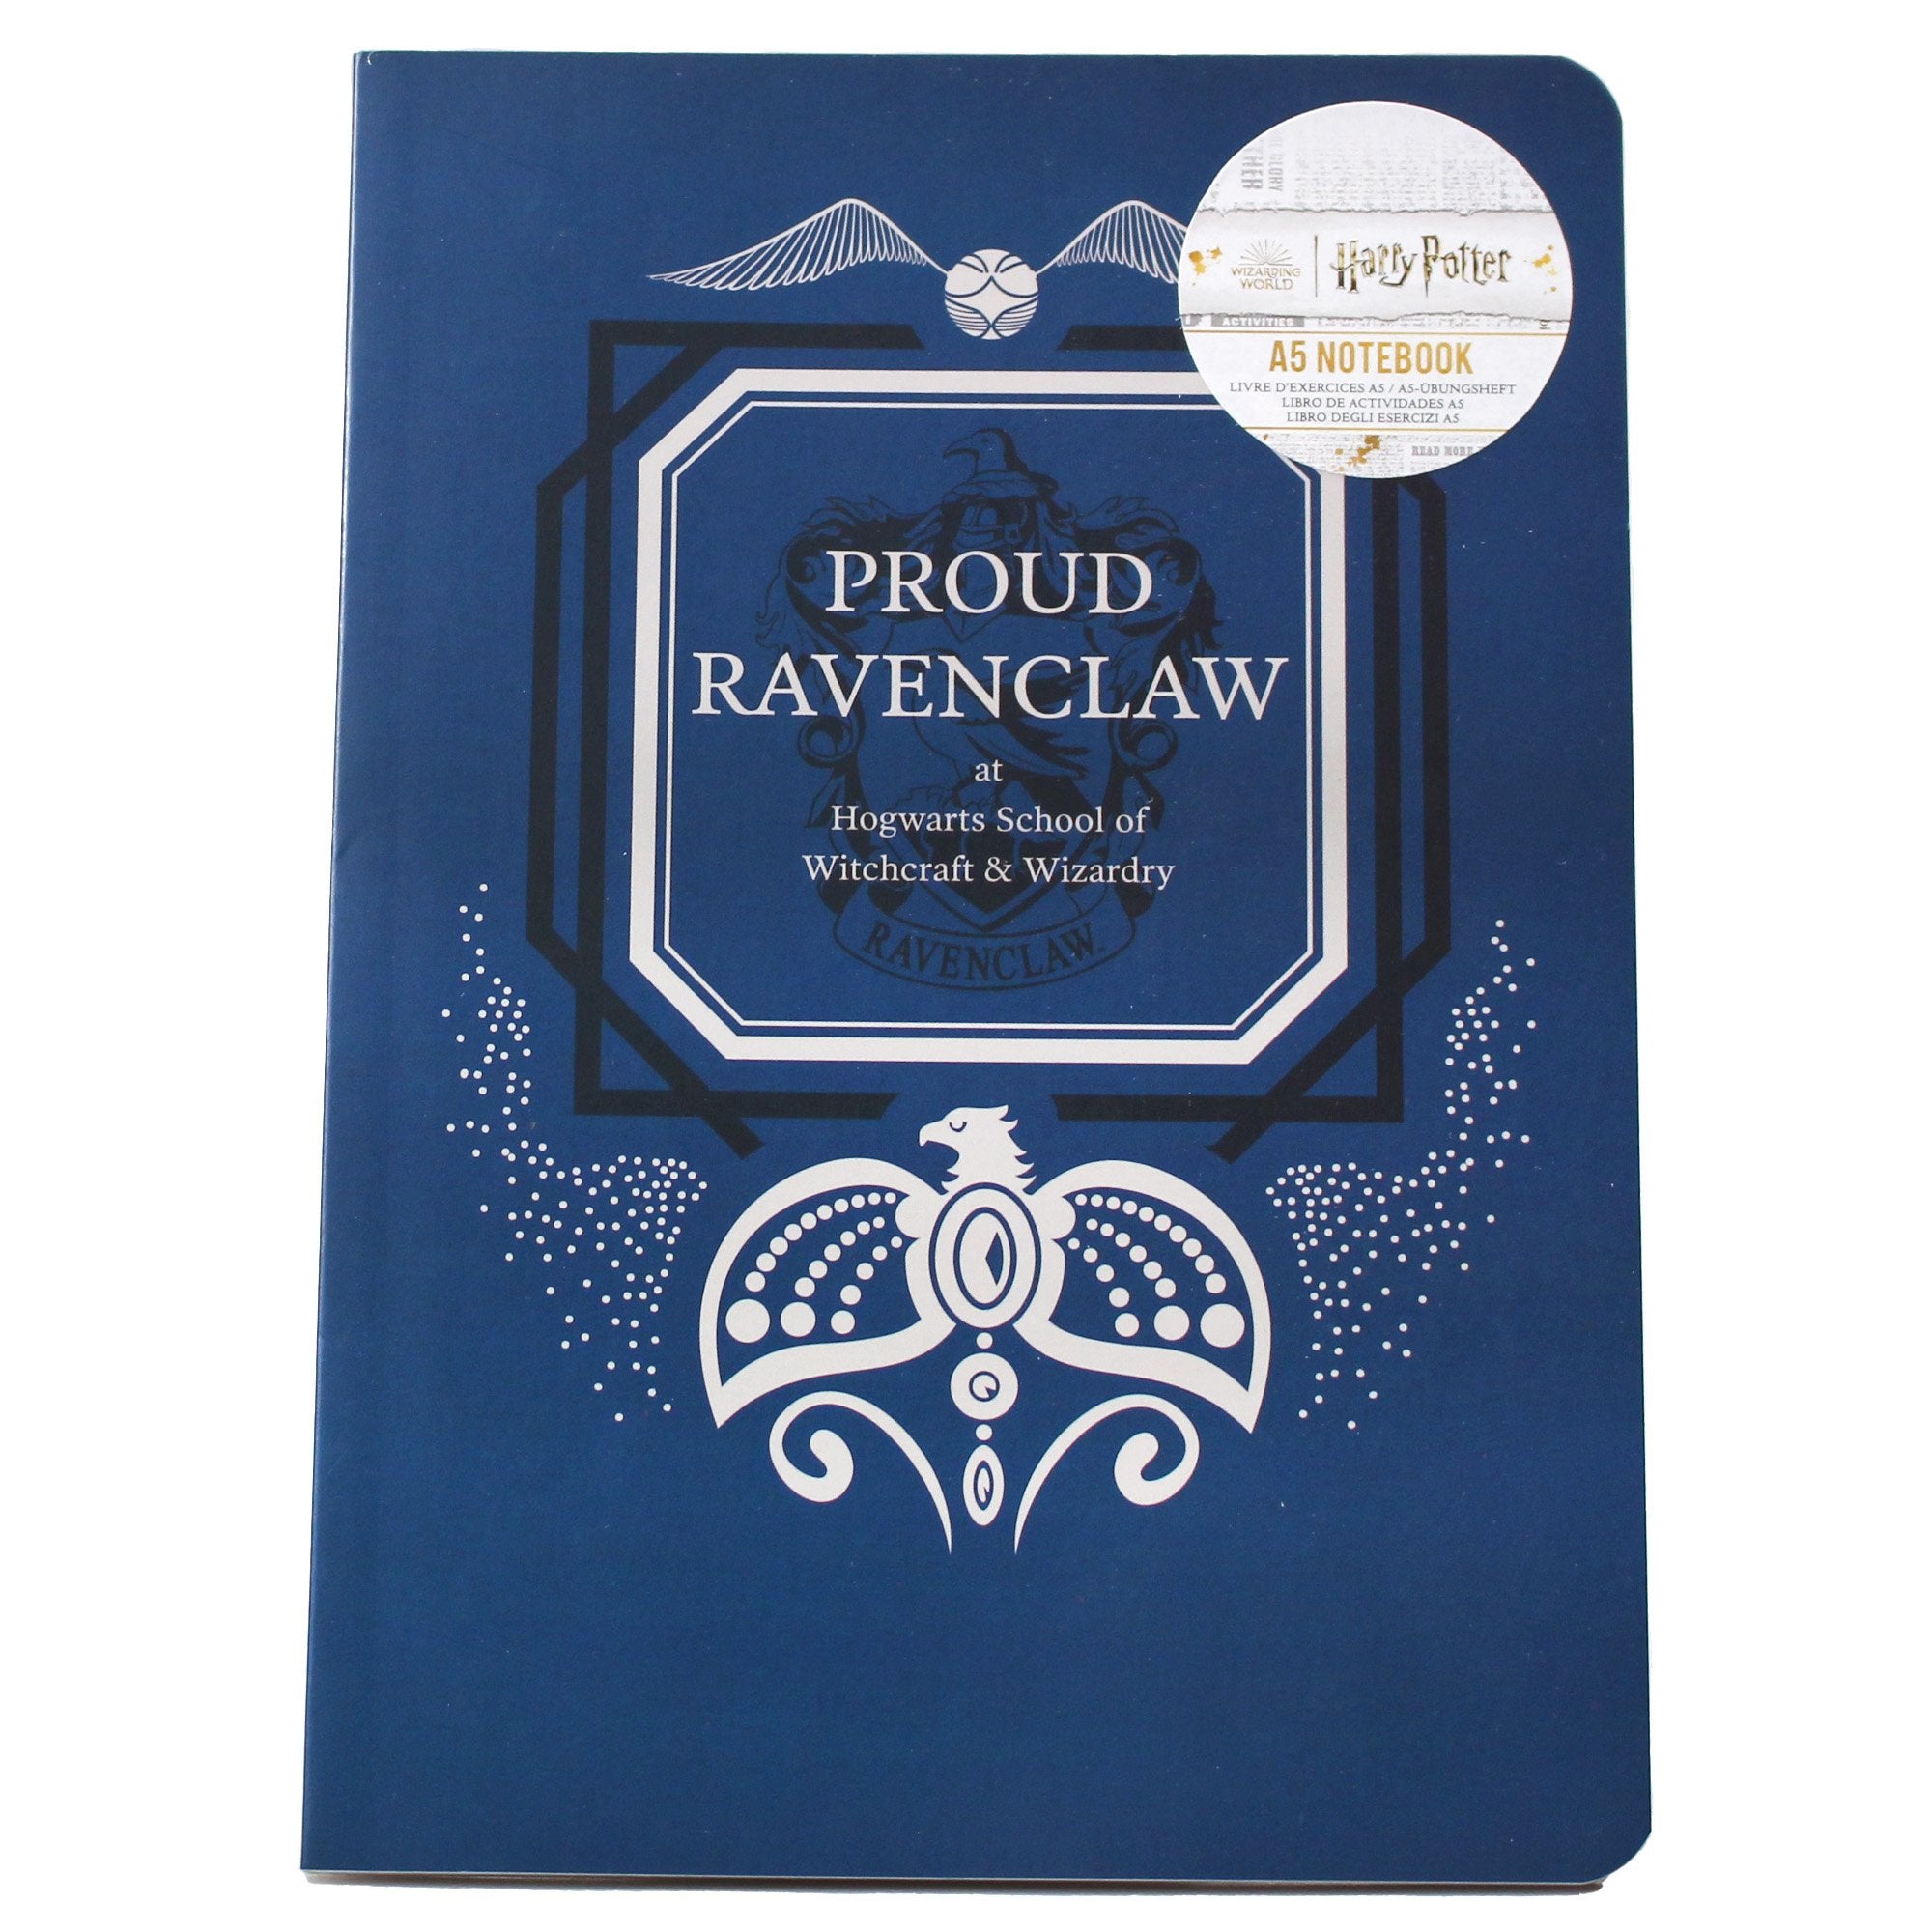 A5 Notebook Soft - Harry Potter (Proud Ravenclaw)